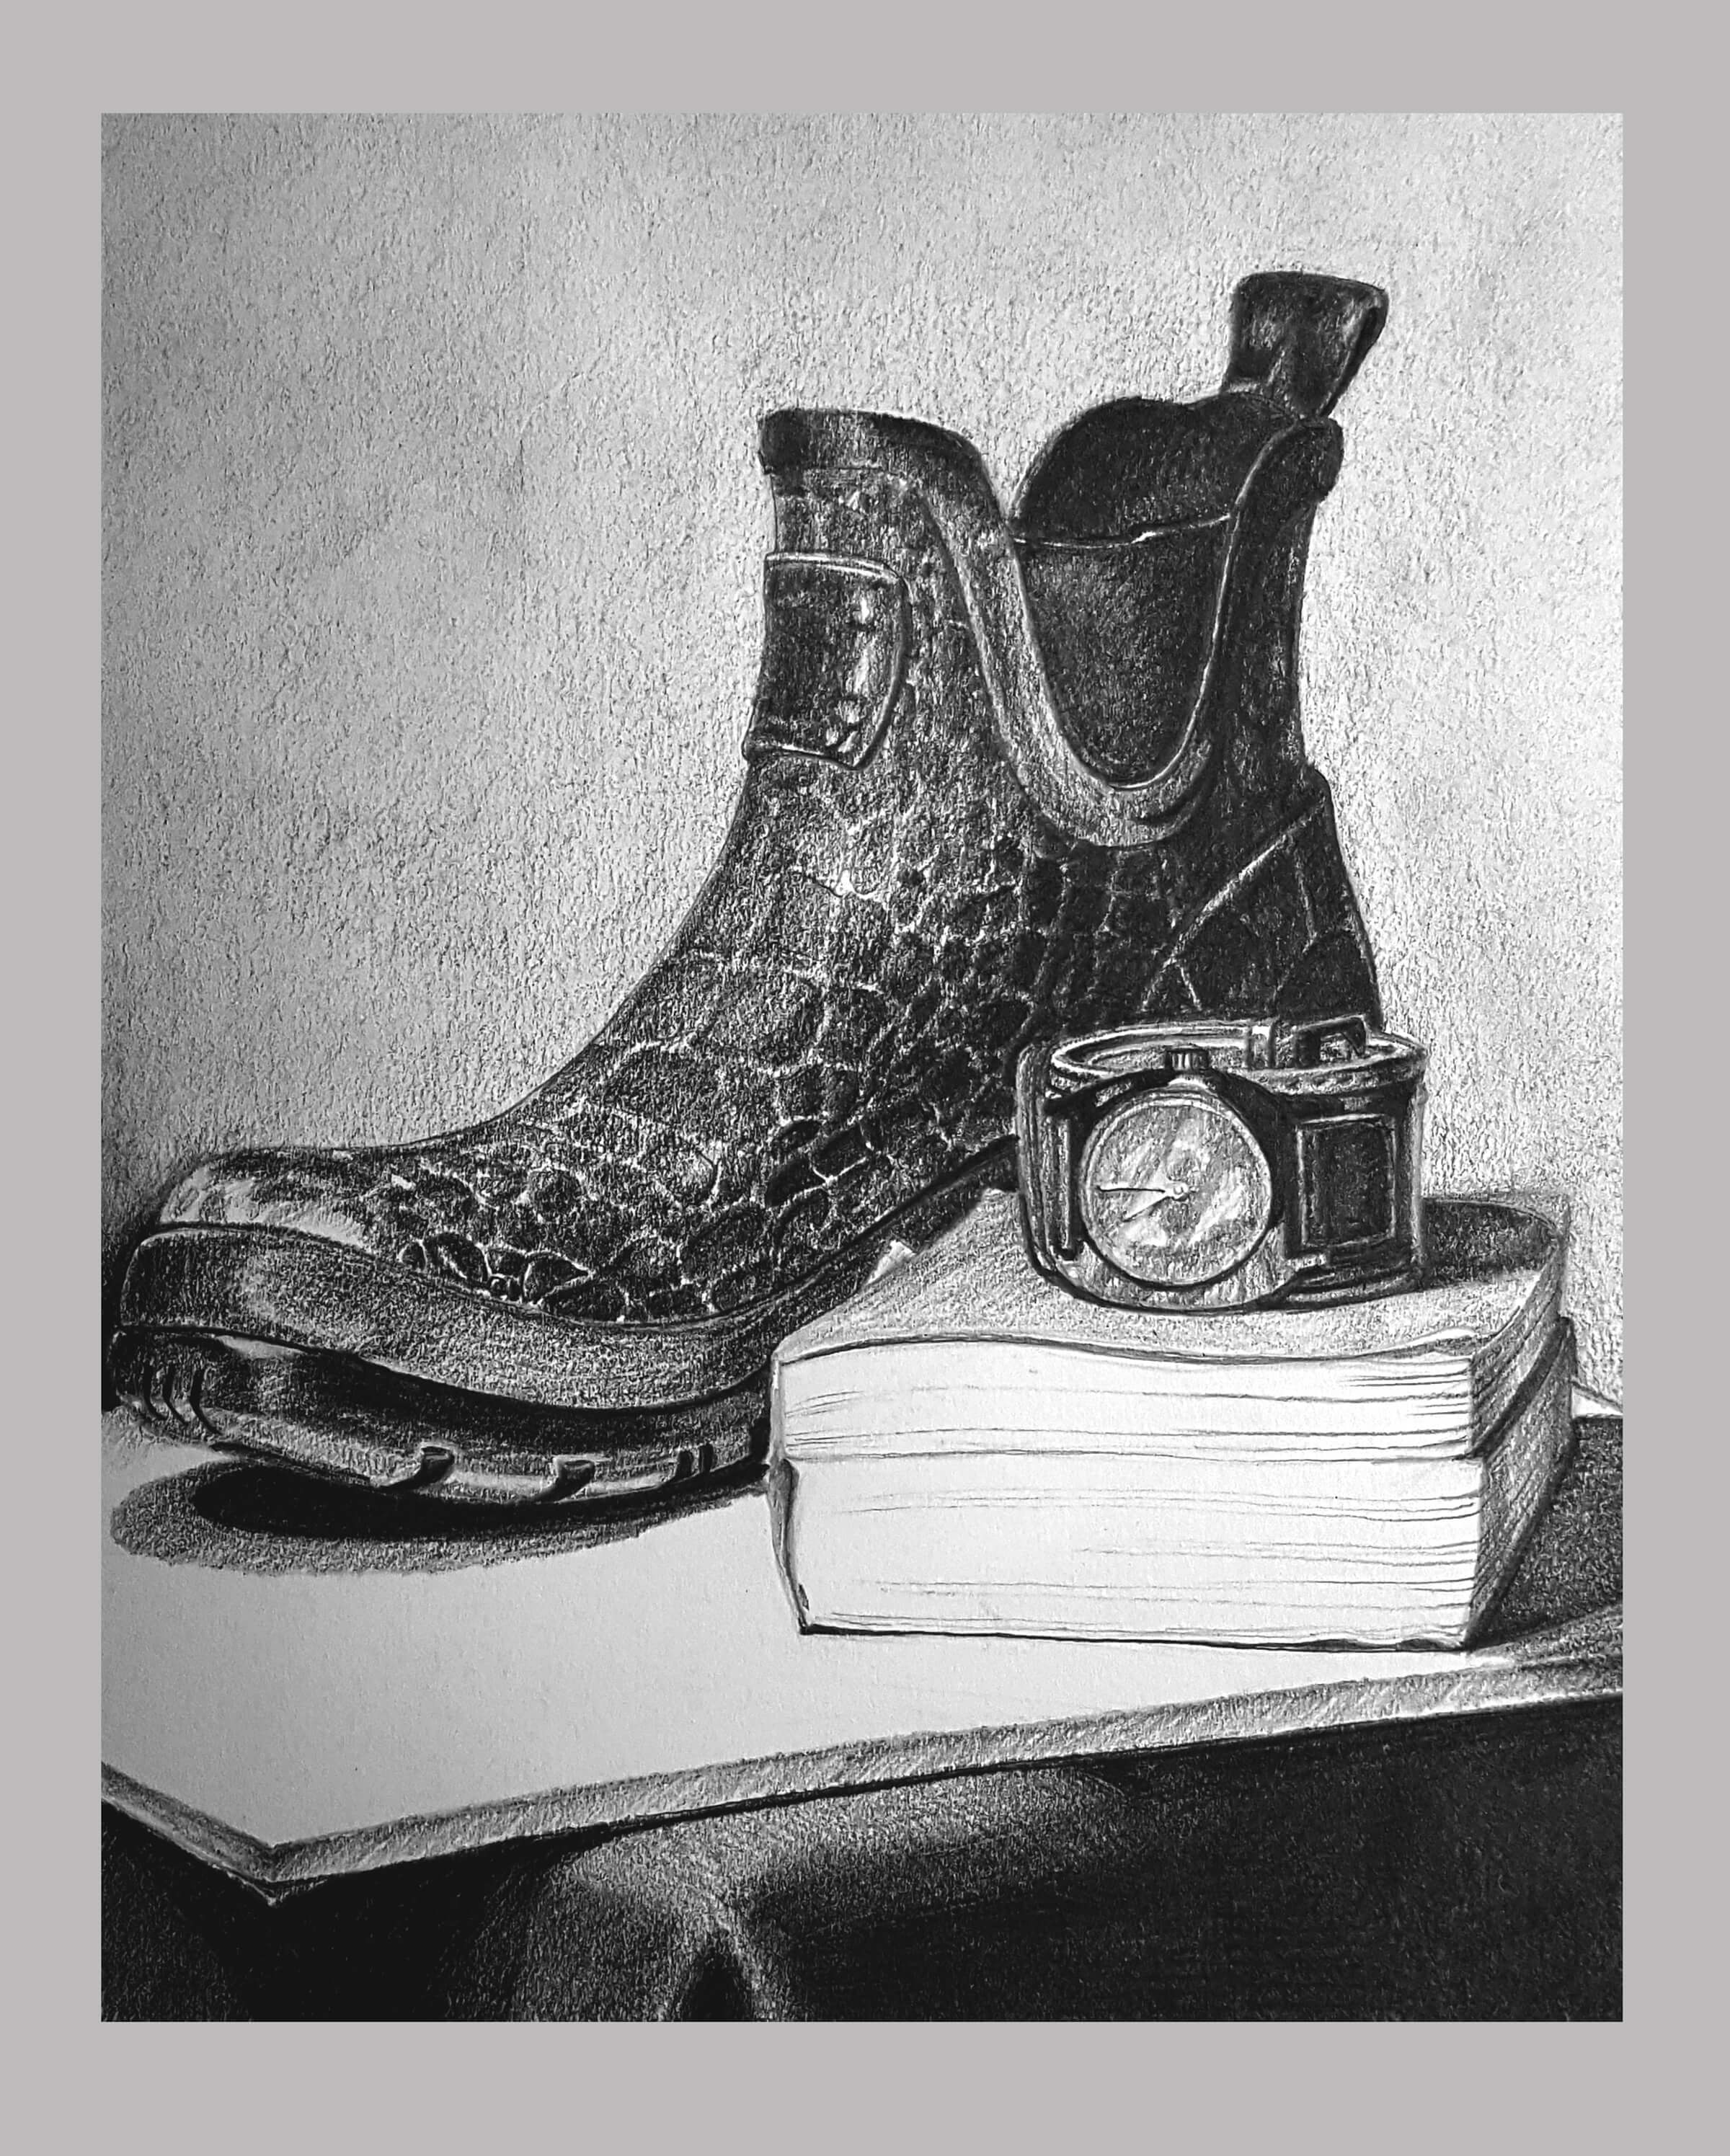 still-life drawing of a boot, wrist watch, and book